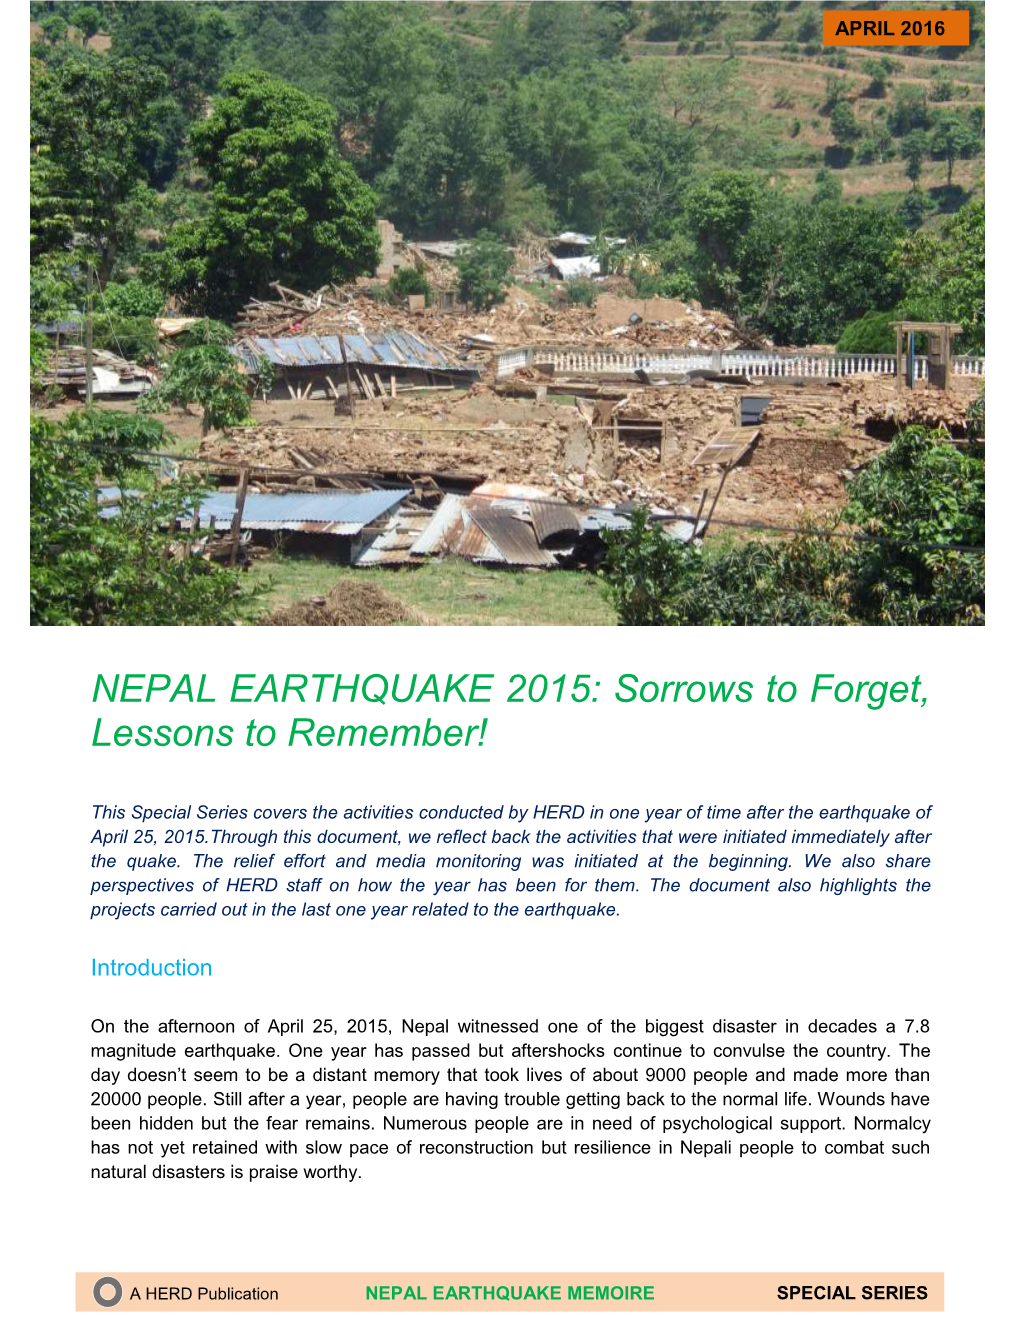 NEPAL EARTHQUAKE 2015: Sorrows to Forget, Lessons to Remember!